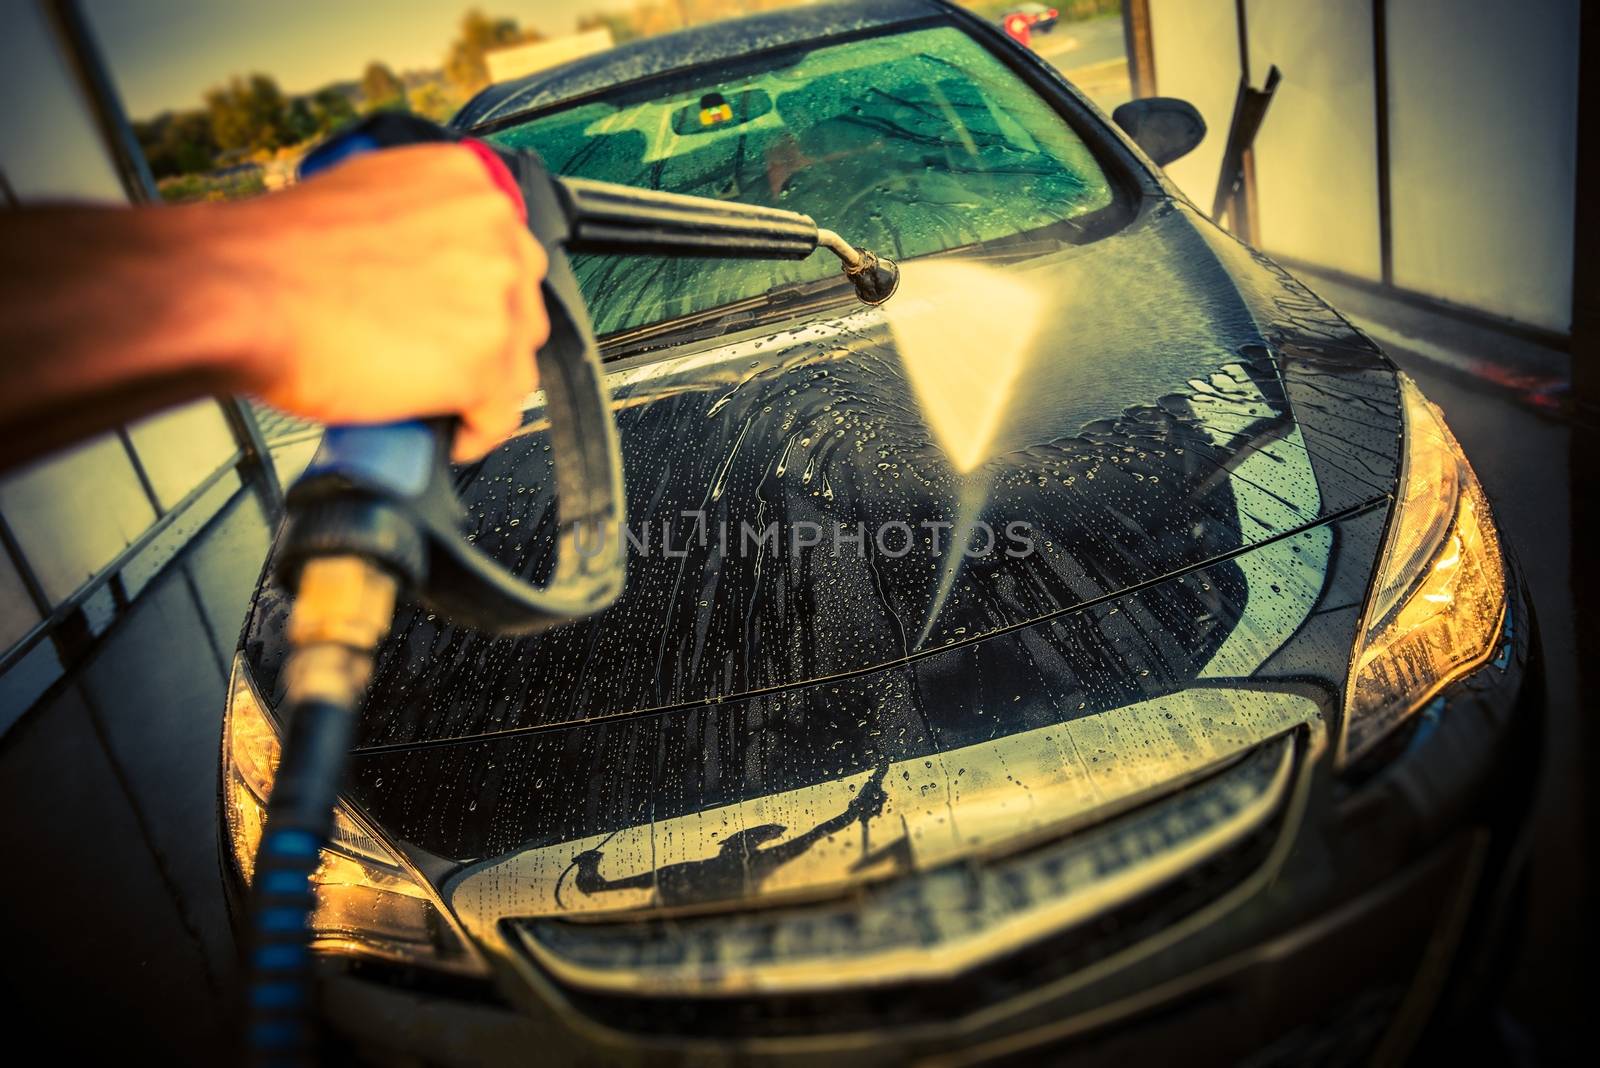 Car Cleaning in a Car Wash. High Pressure Car Washing. Taking Care of a Car.